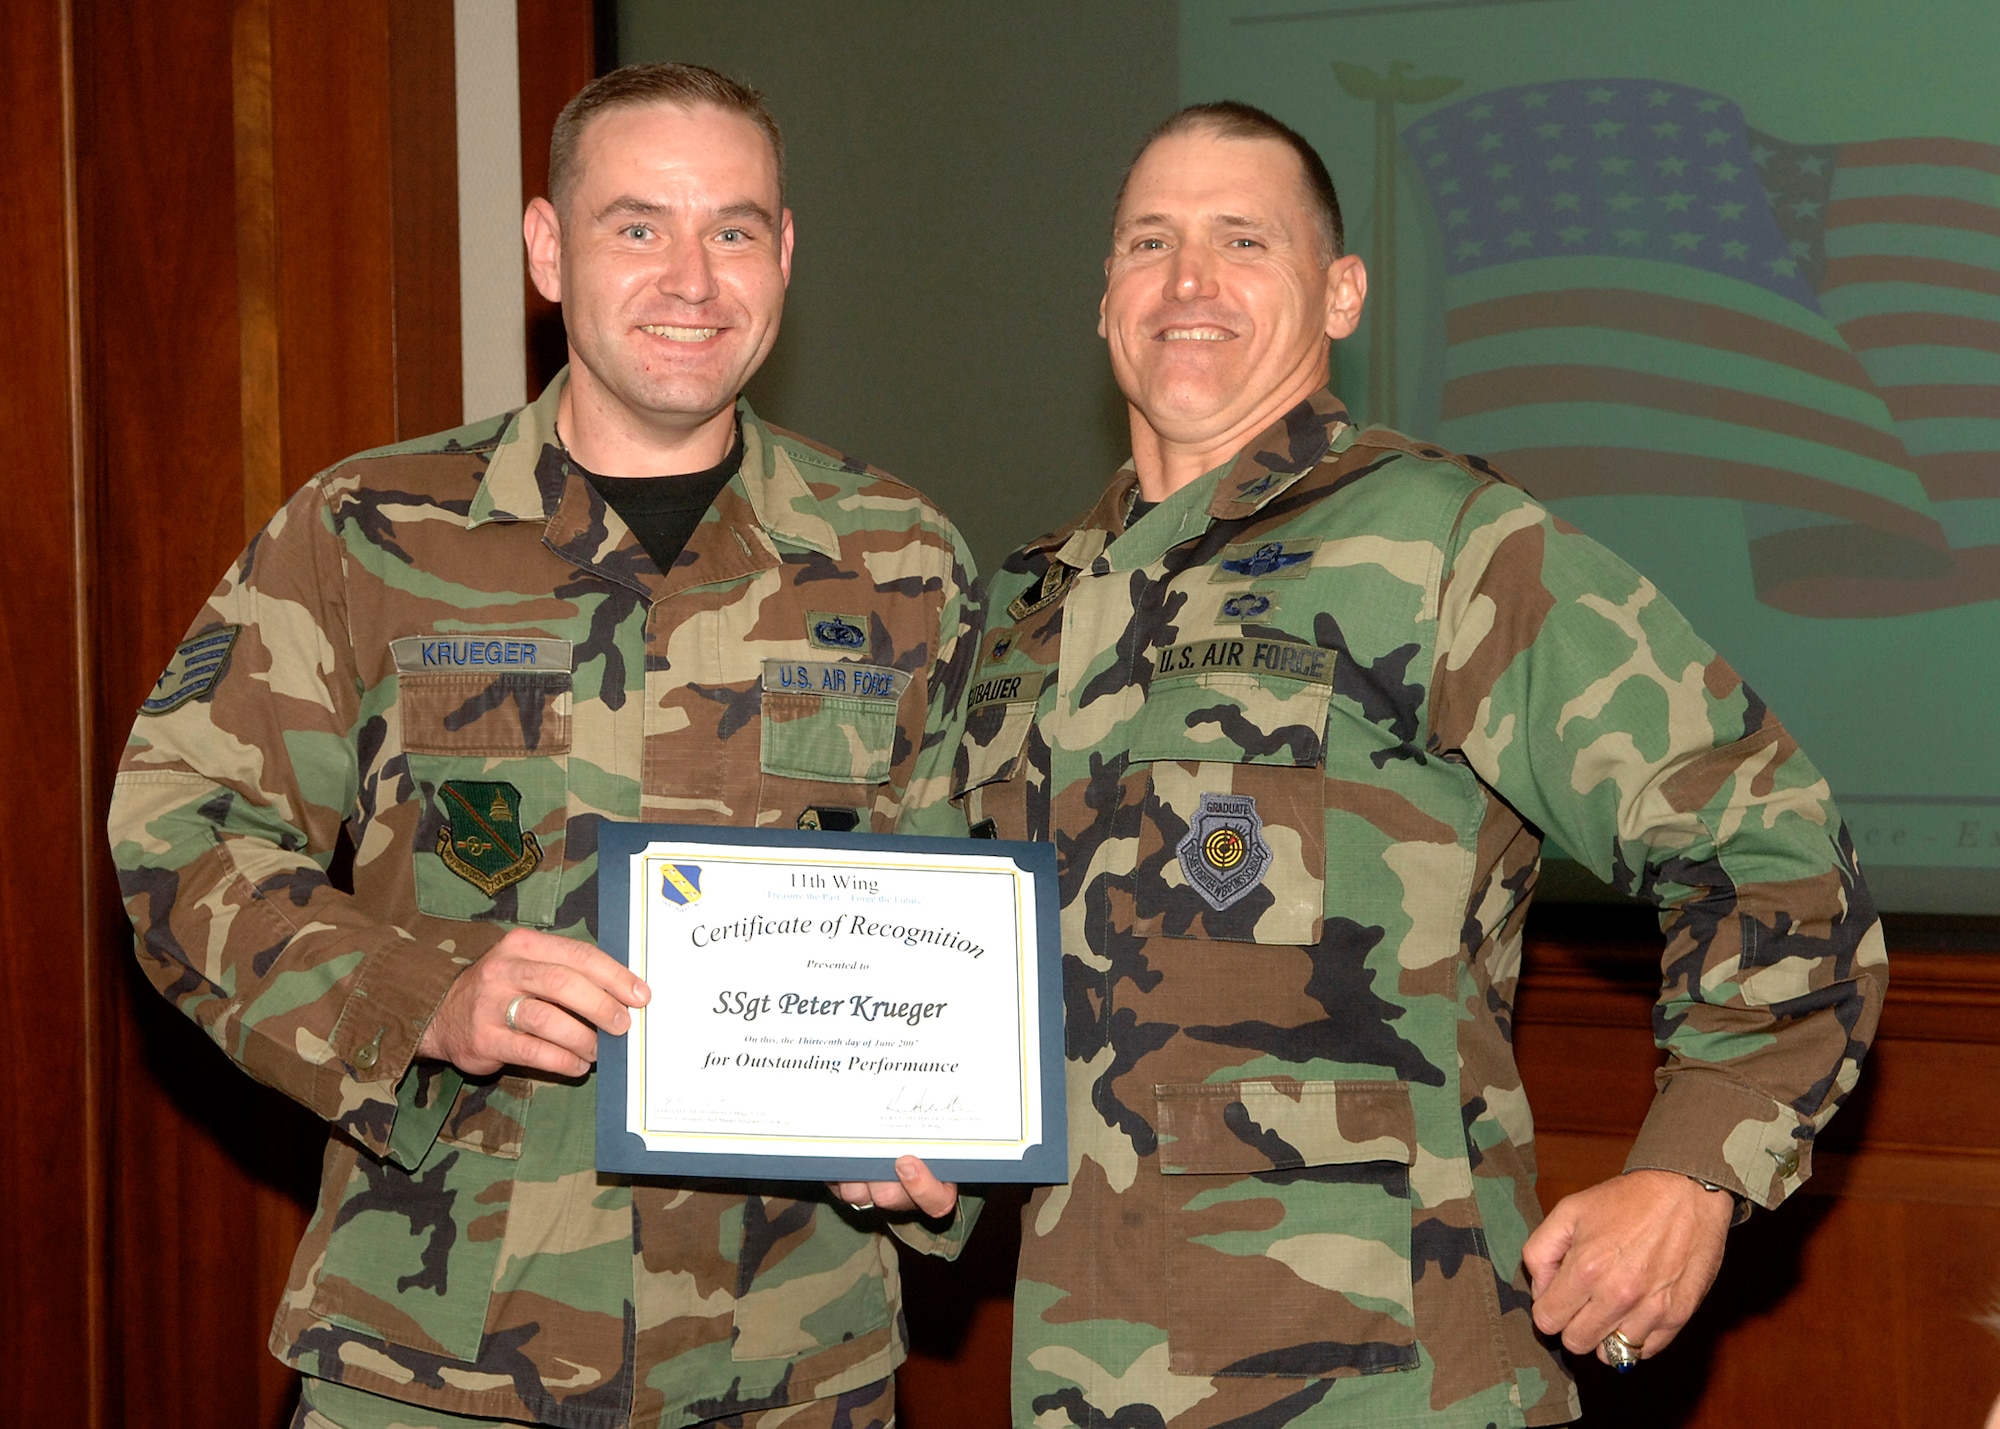 Staff Sgt. Peter Krueger displays certificate of recognition for his outstanding performance in the January 2007 UCI, while Col. Kurt F. Neubauer, 11th Wing commander, enjoys the moment at wing standup June 13. Colonel Neubauer also presented Sergeant Krueger with an 11th Wing coin in recognition of his impressive contributions to the Pentagon Military Personnel Flight mission. (U.S. Air Force photo by Thomas Dennis)